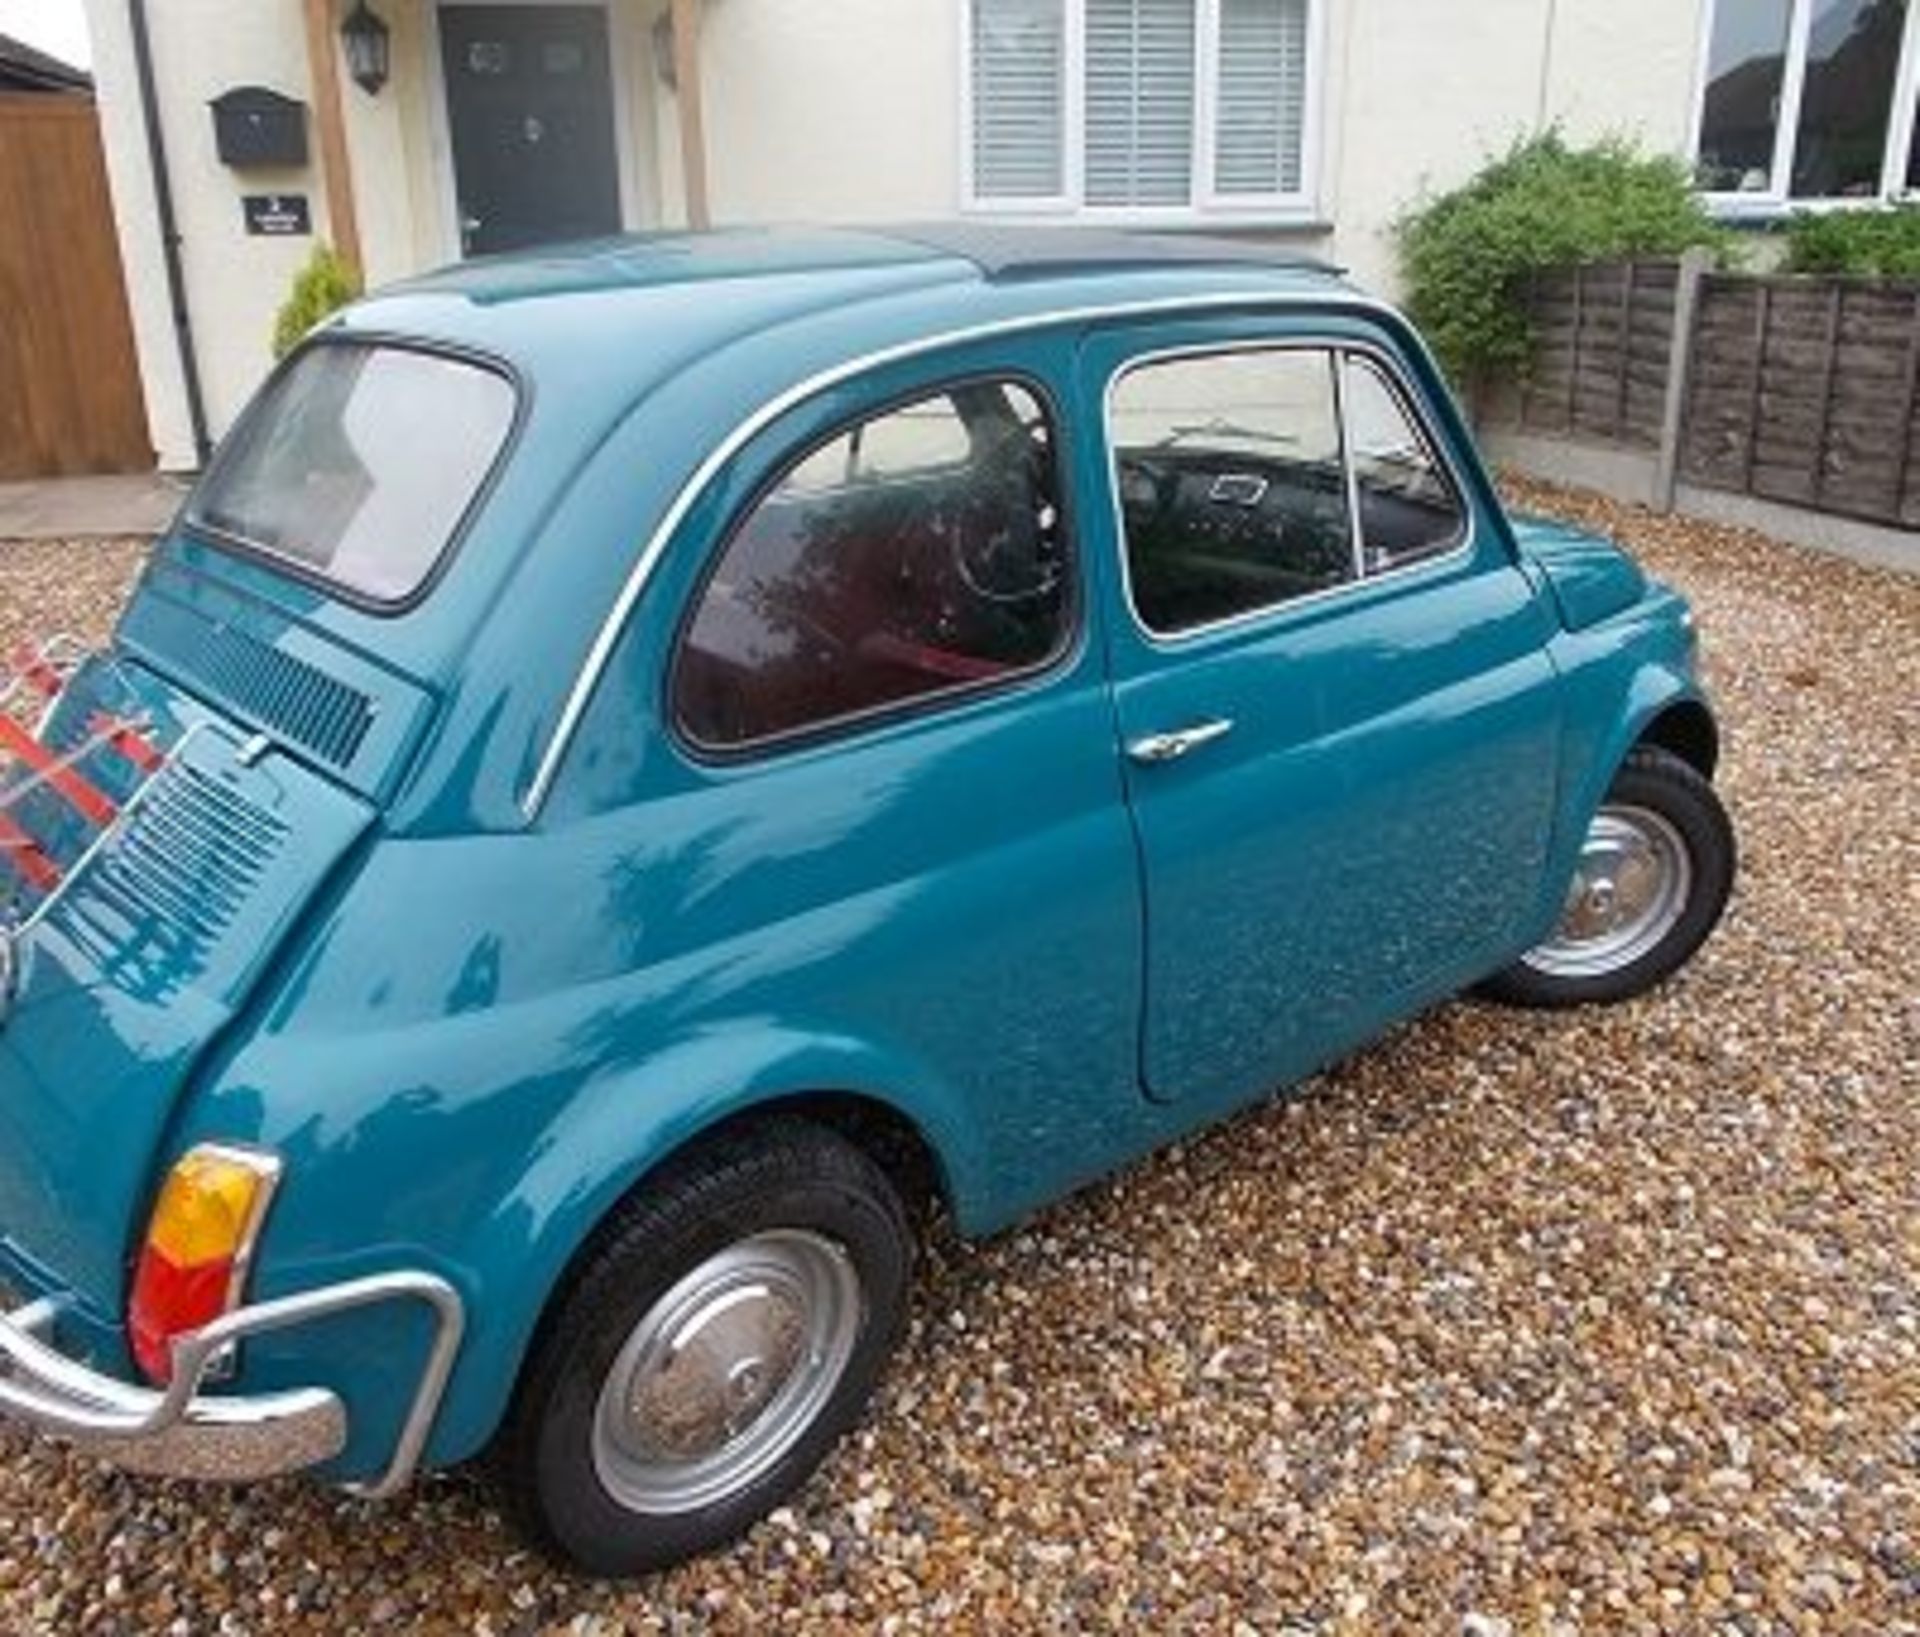 Fiat 500L 1970 “Fully Restored” - The first of our beautiful Fiat 500’s being offered is this 1970 - Image 3 of 7